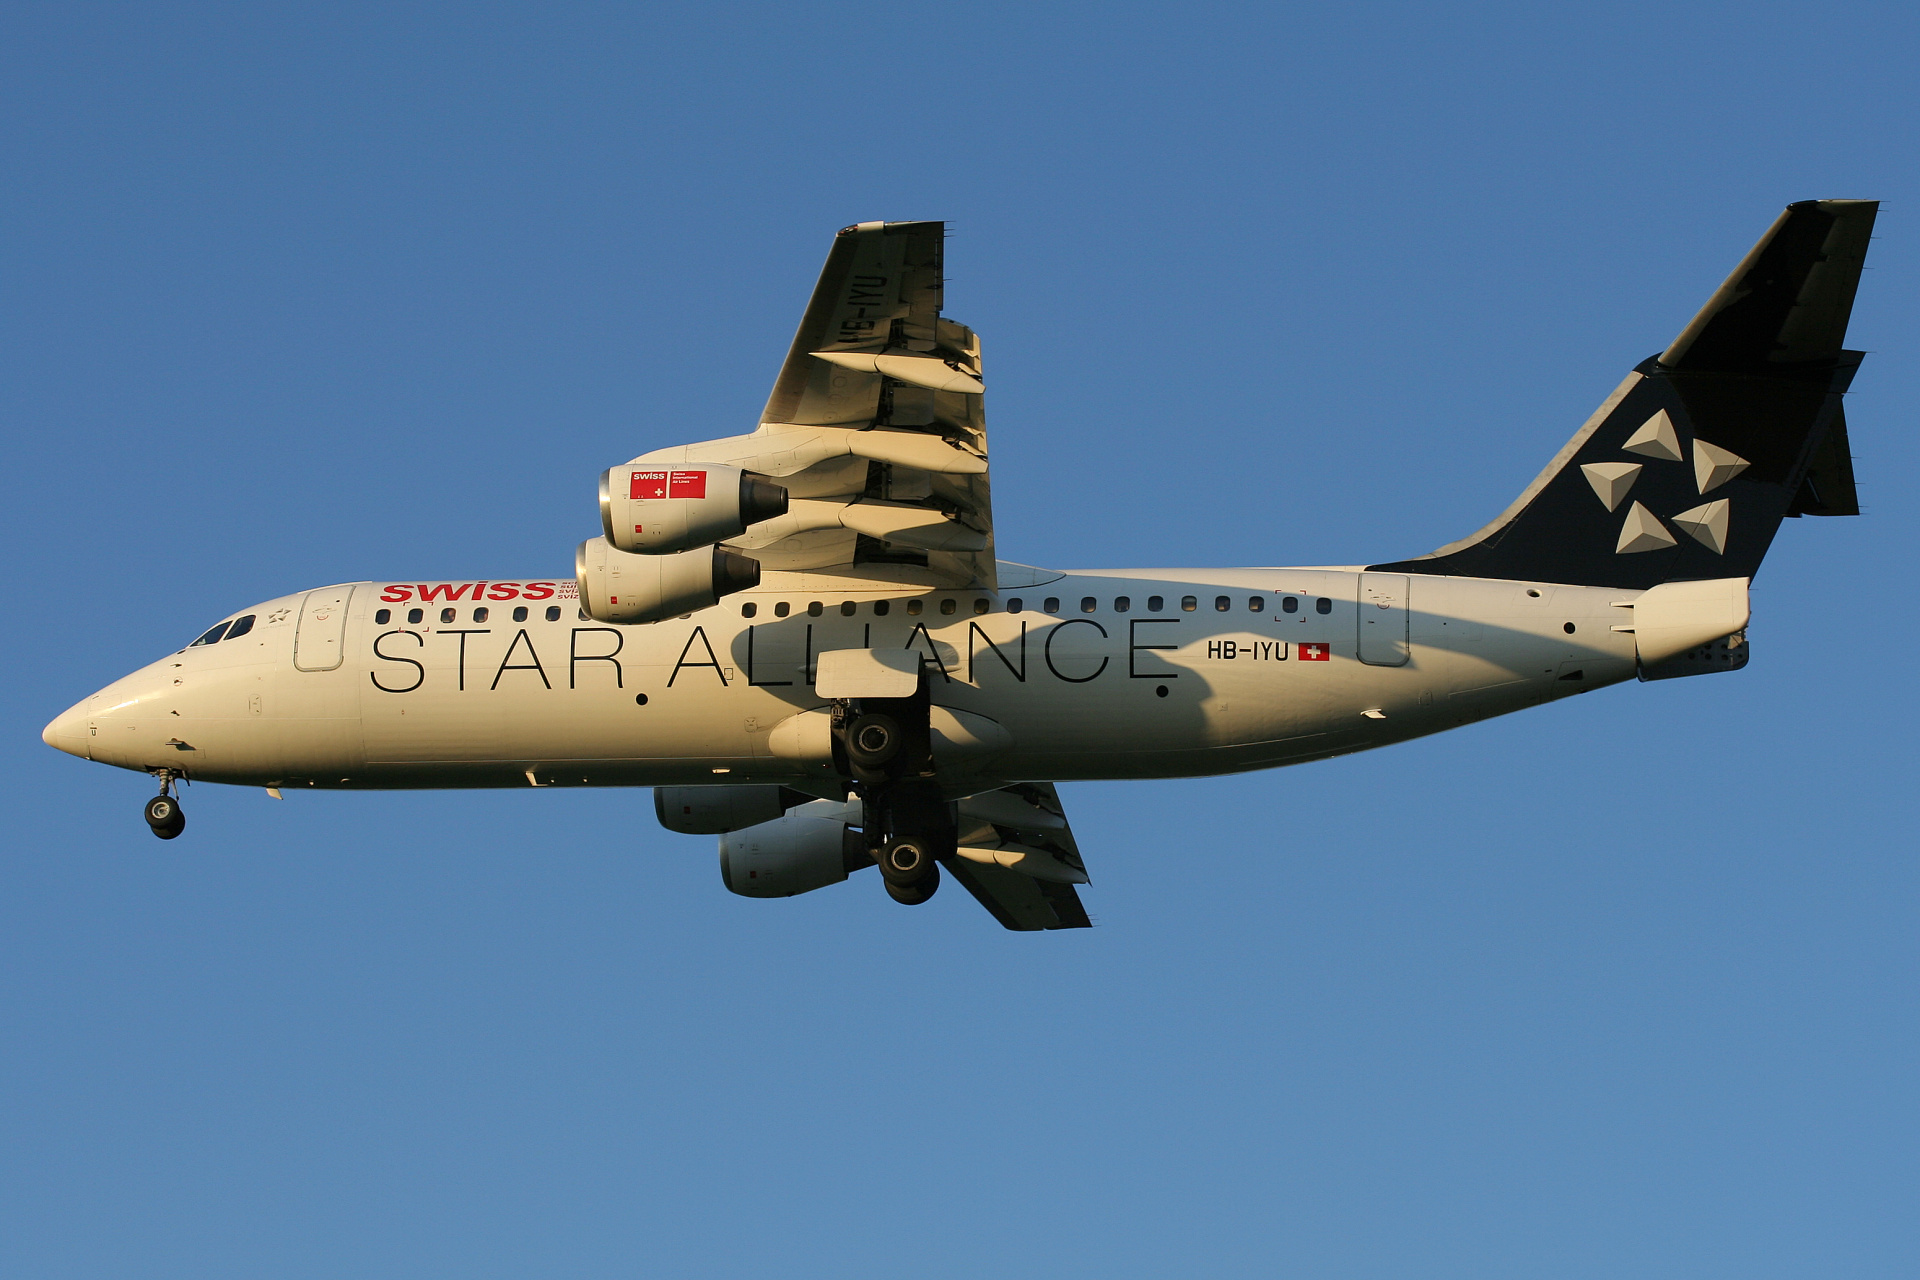 HB-IYU (Star Alliance livery) (Aircraft » EPWA Spotting » BAe 146 and revisions » Avro RJ100 » Swiss Global Air Lines)